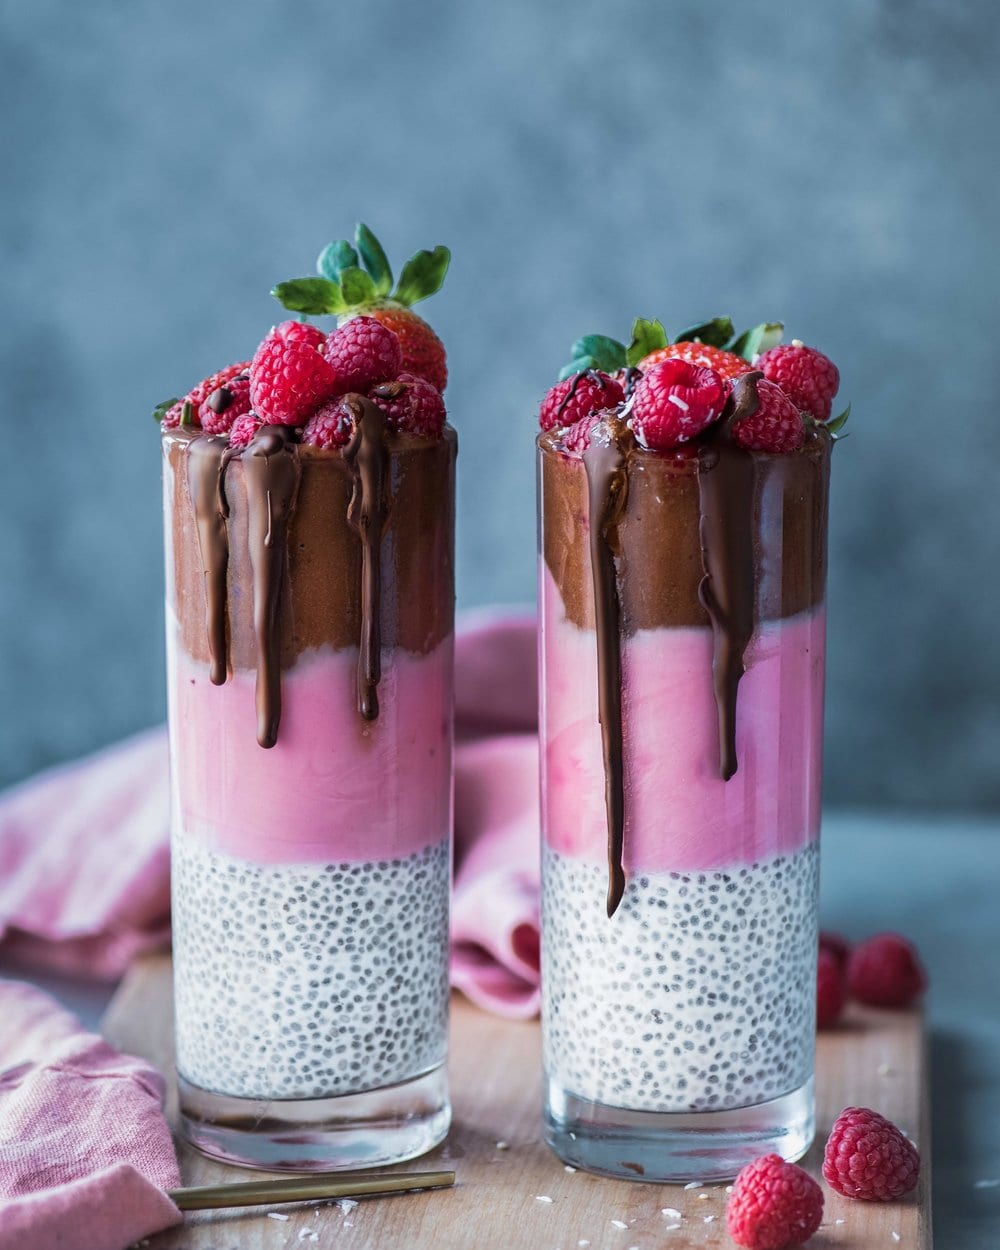 Two chocolate, raspberry and chia seed smoothies topped with raspberries on a wooden cutting board.